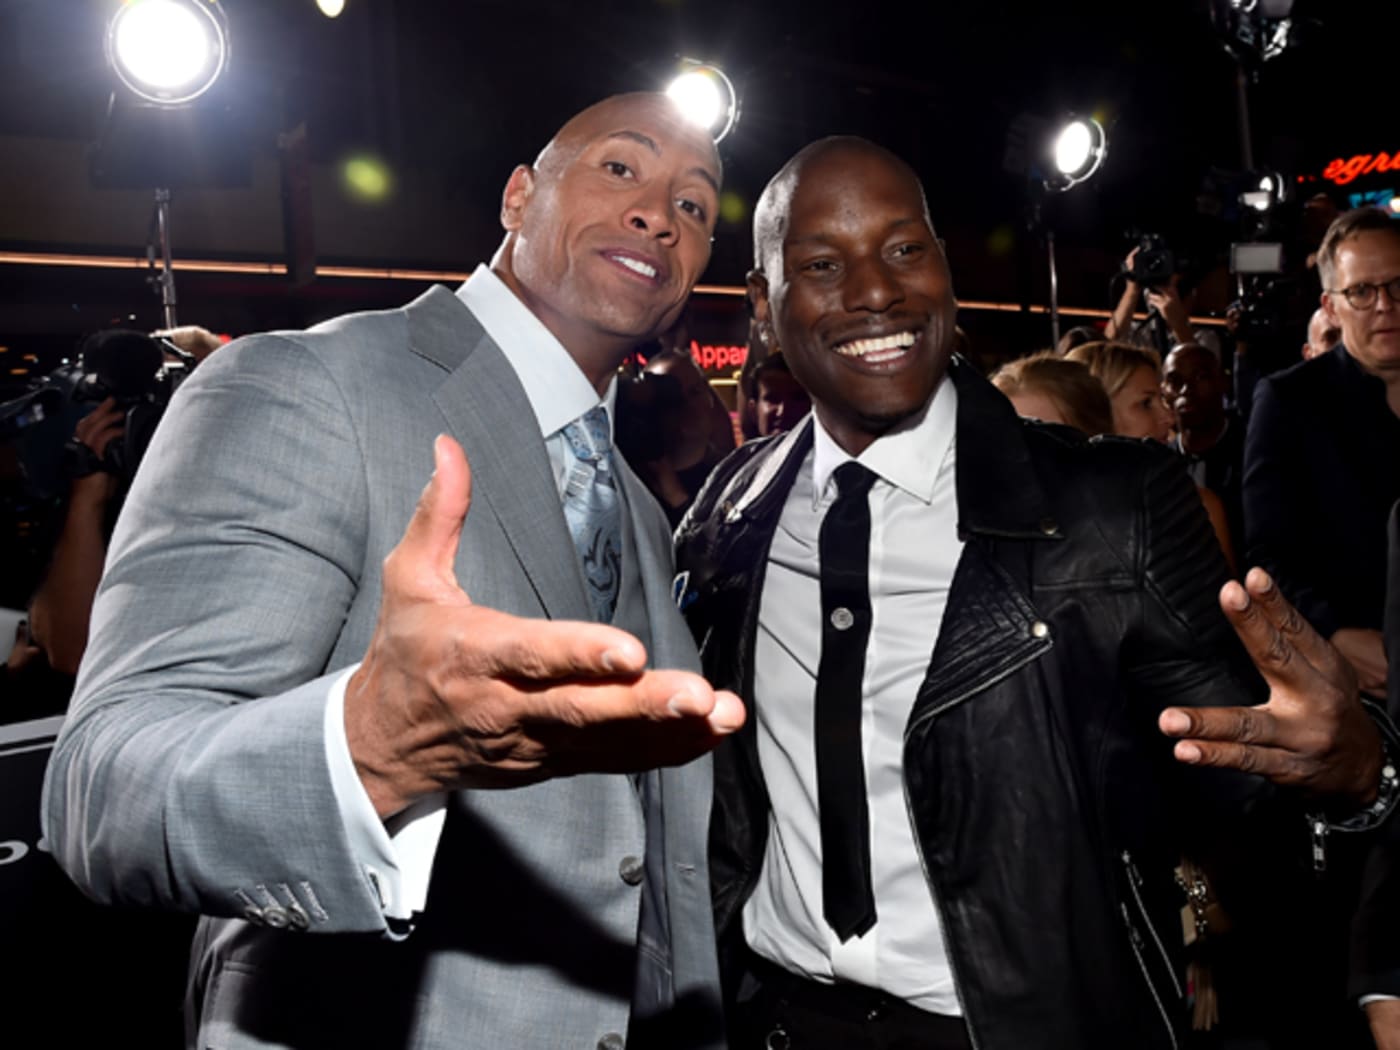 Dwayne 'The Rock' Johnson and Tyrese Gibson attend 'Furious 7' premiere